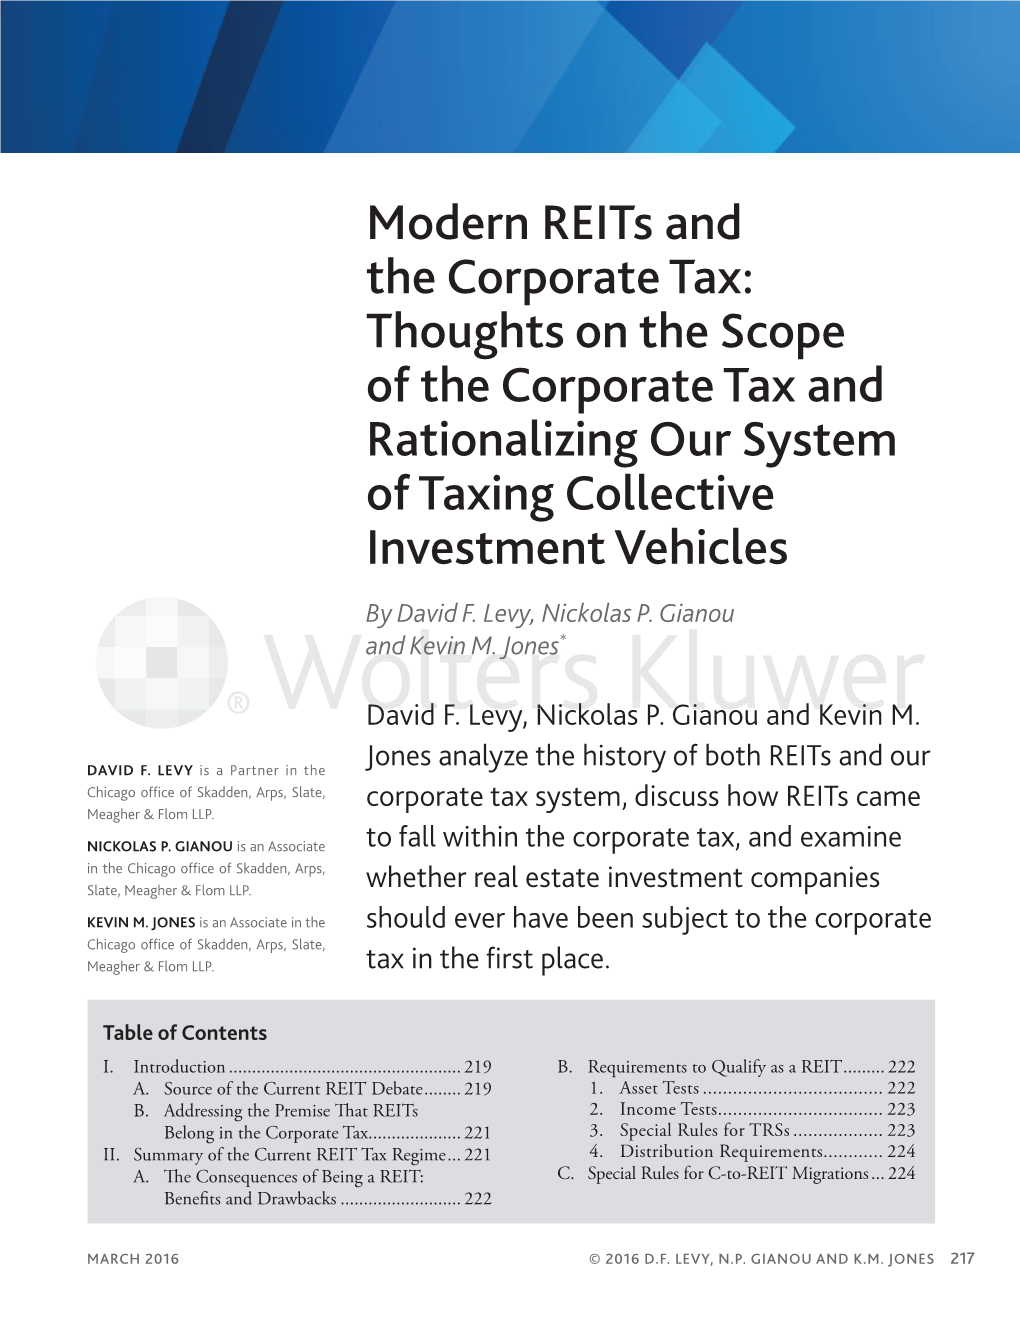 Modern Reits and the Corporate Tax: Thoughts on the Scope of the Corporate Tax and Rationalizing Our System of Taxing Collective Investment Vehicles by David F